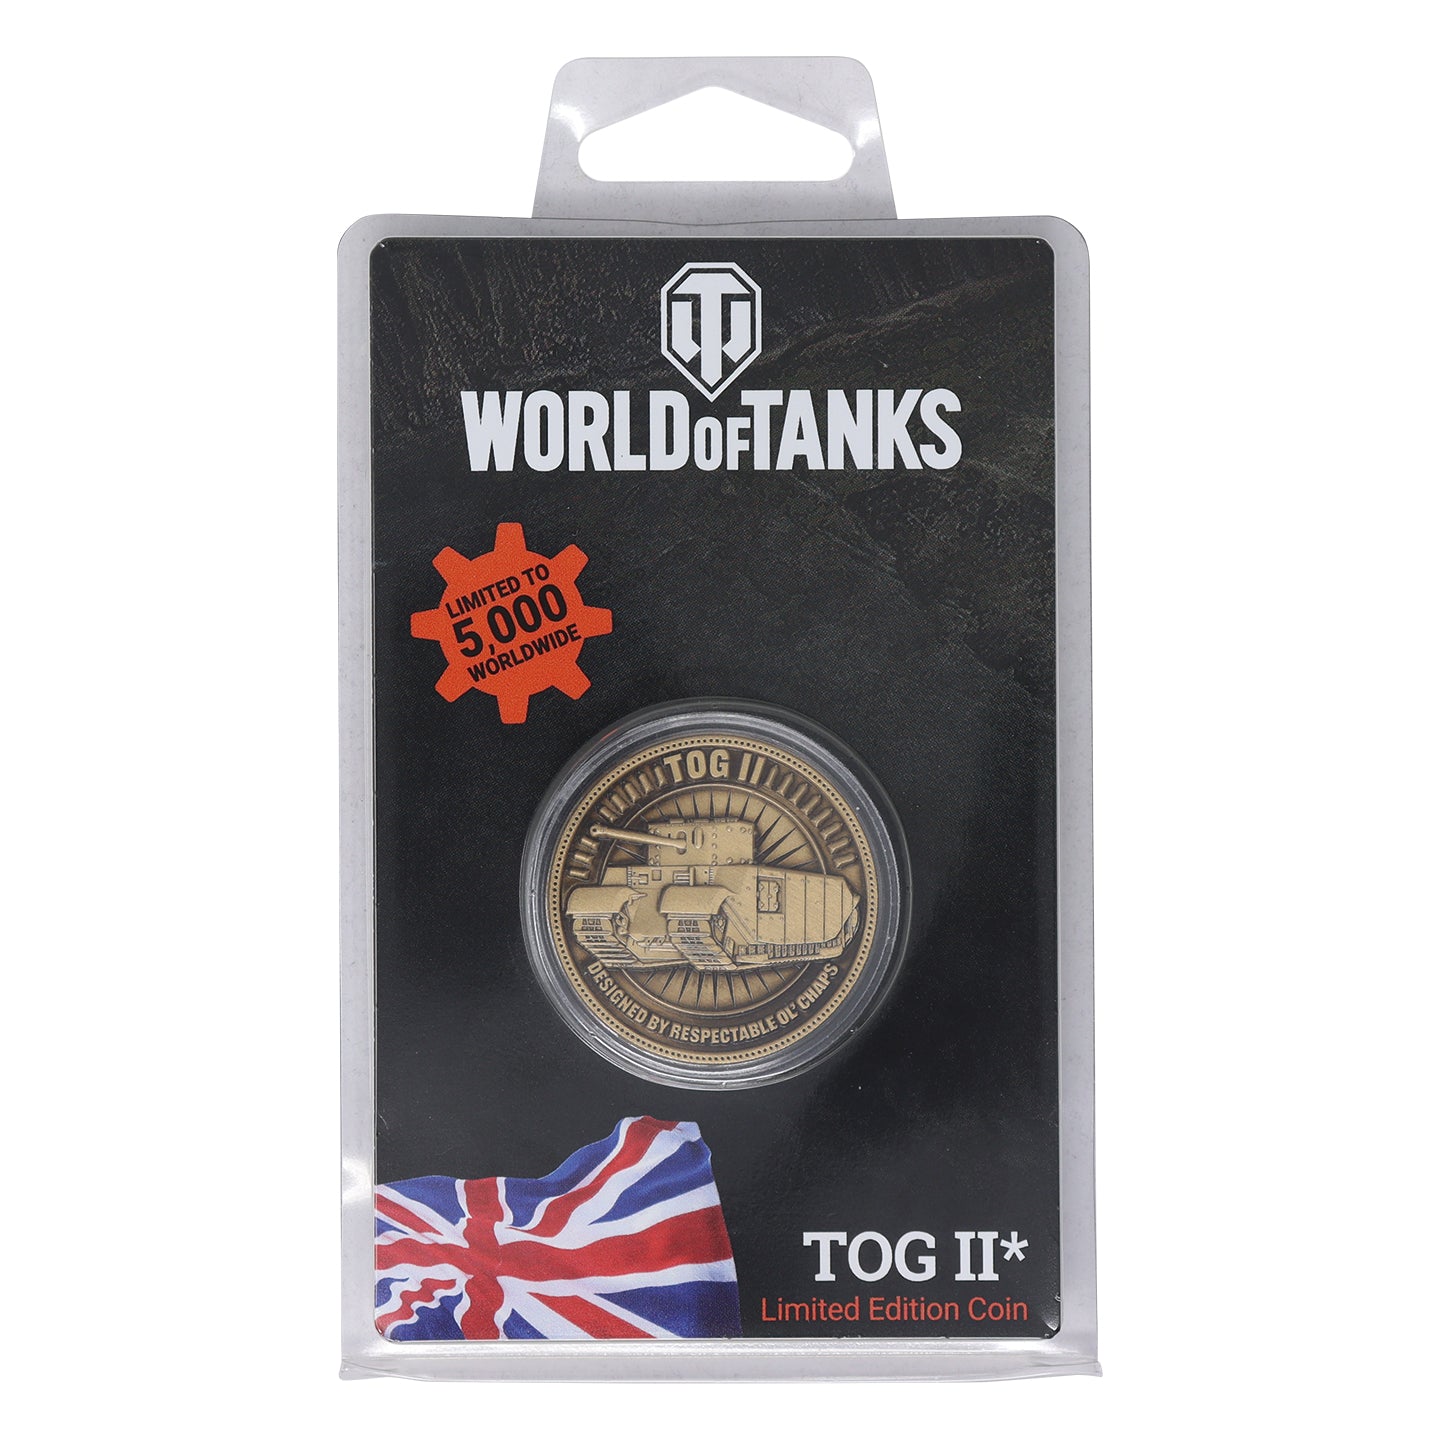 World of Tanks Limited Edition Tog II* Tank Collectible Coin